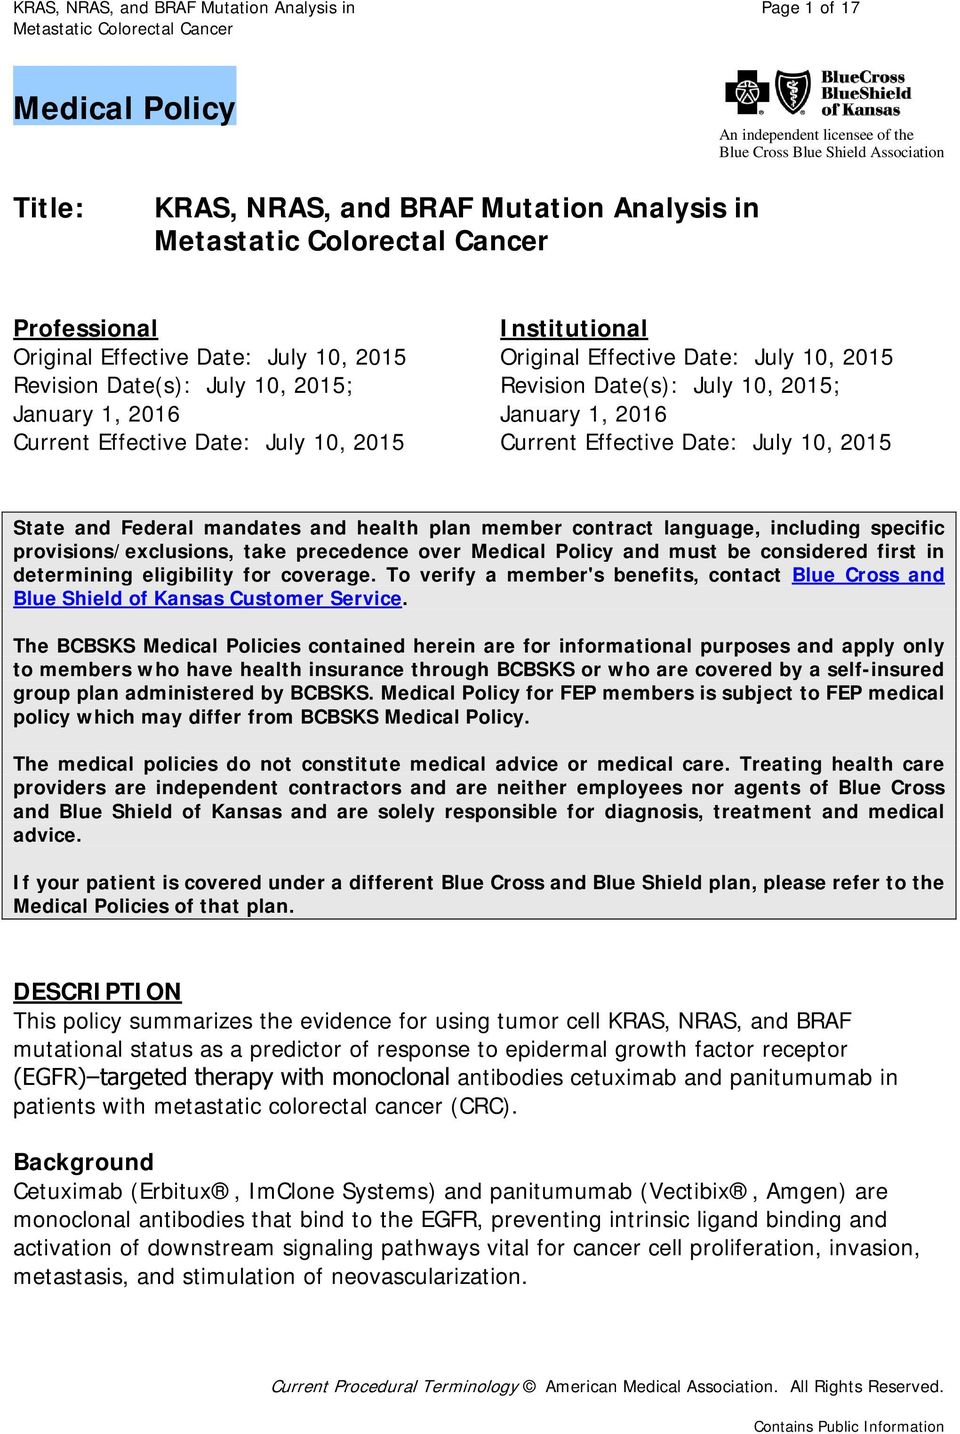 Effective Date: July 10, 2015 Current Effective Date: July 10, 2015 State and Federal mandates and health plan member contract language, including specific provisions/exclusions, take precedence over